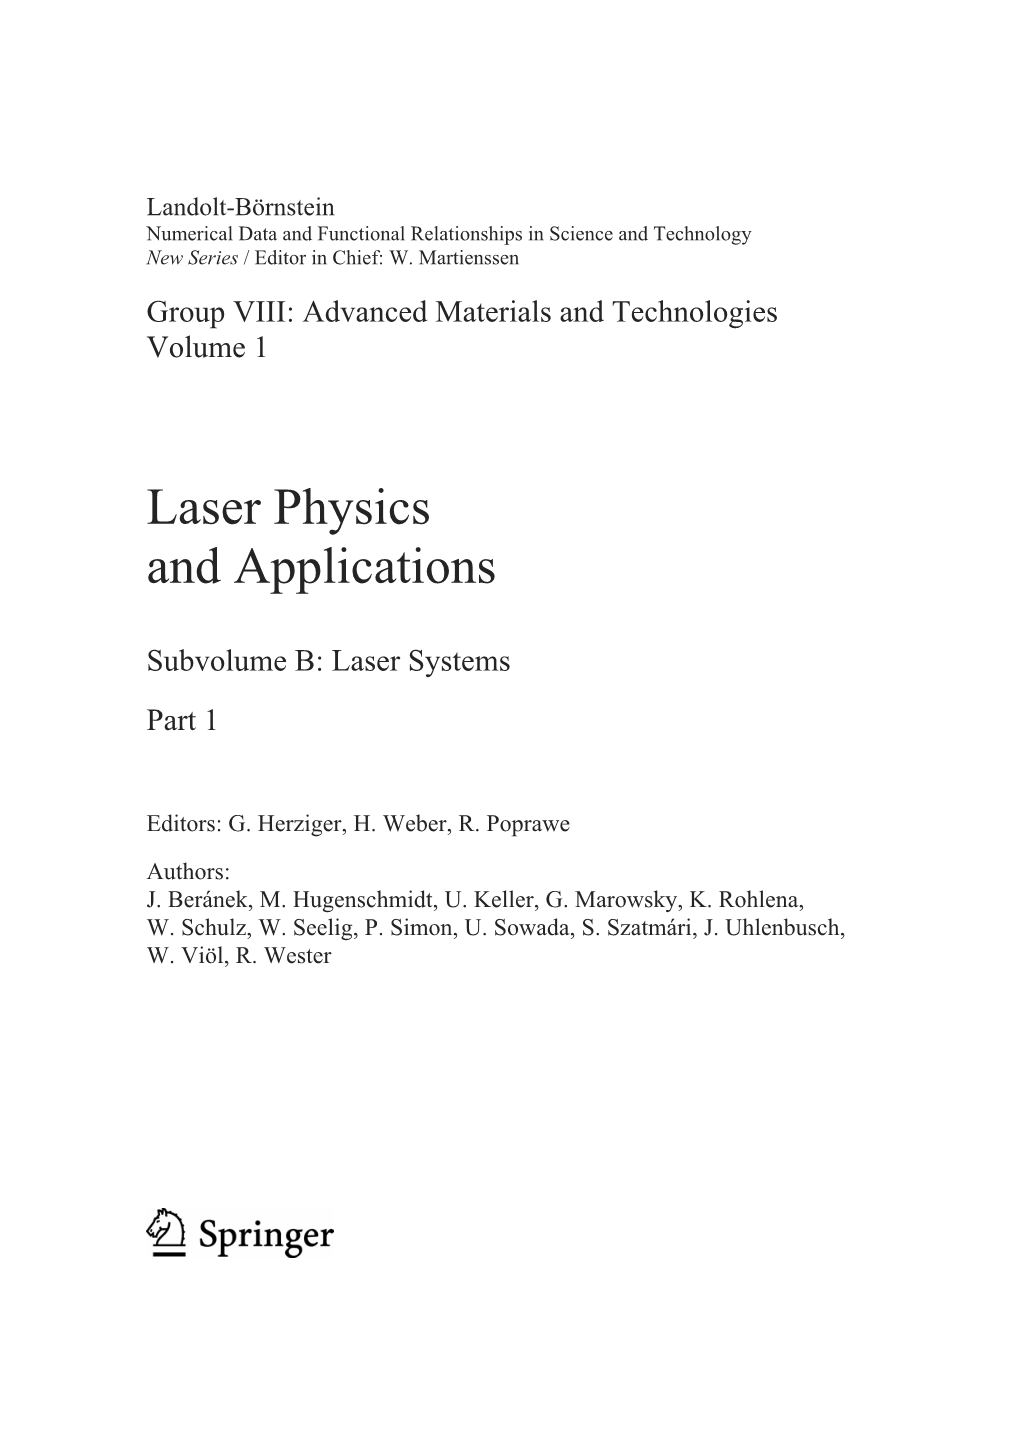 Laser Physics and Applications